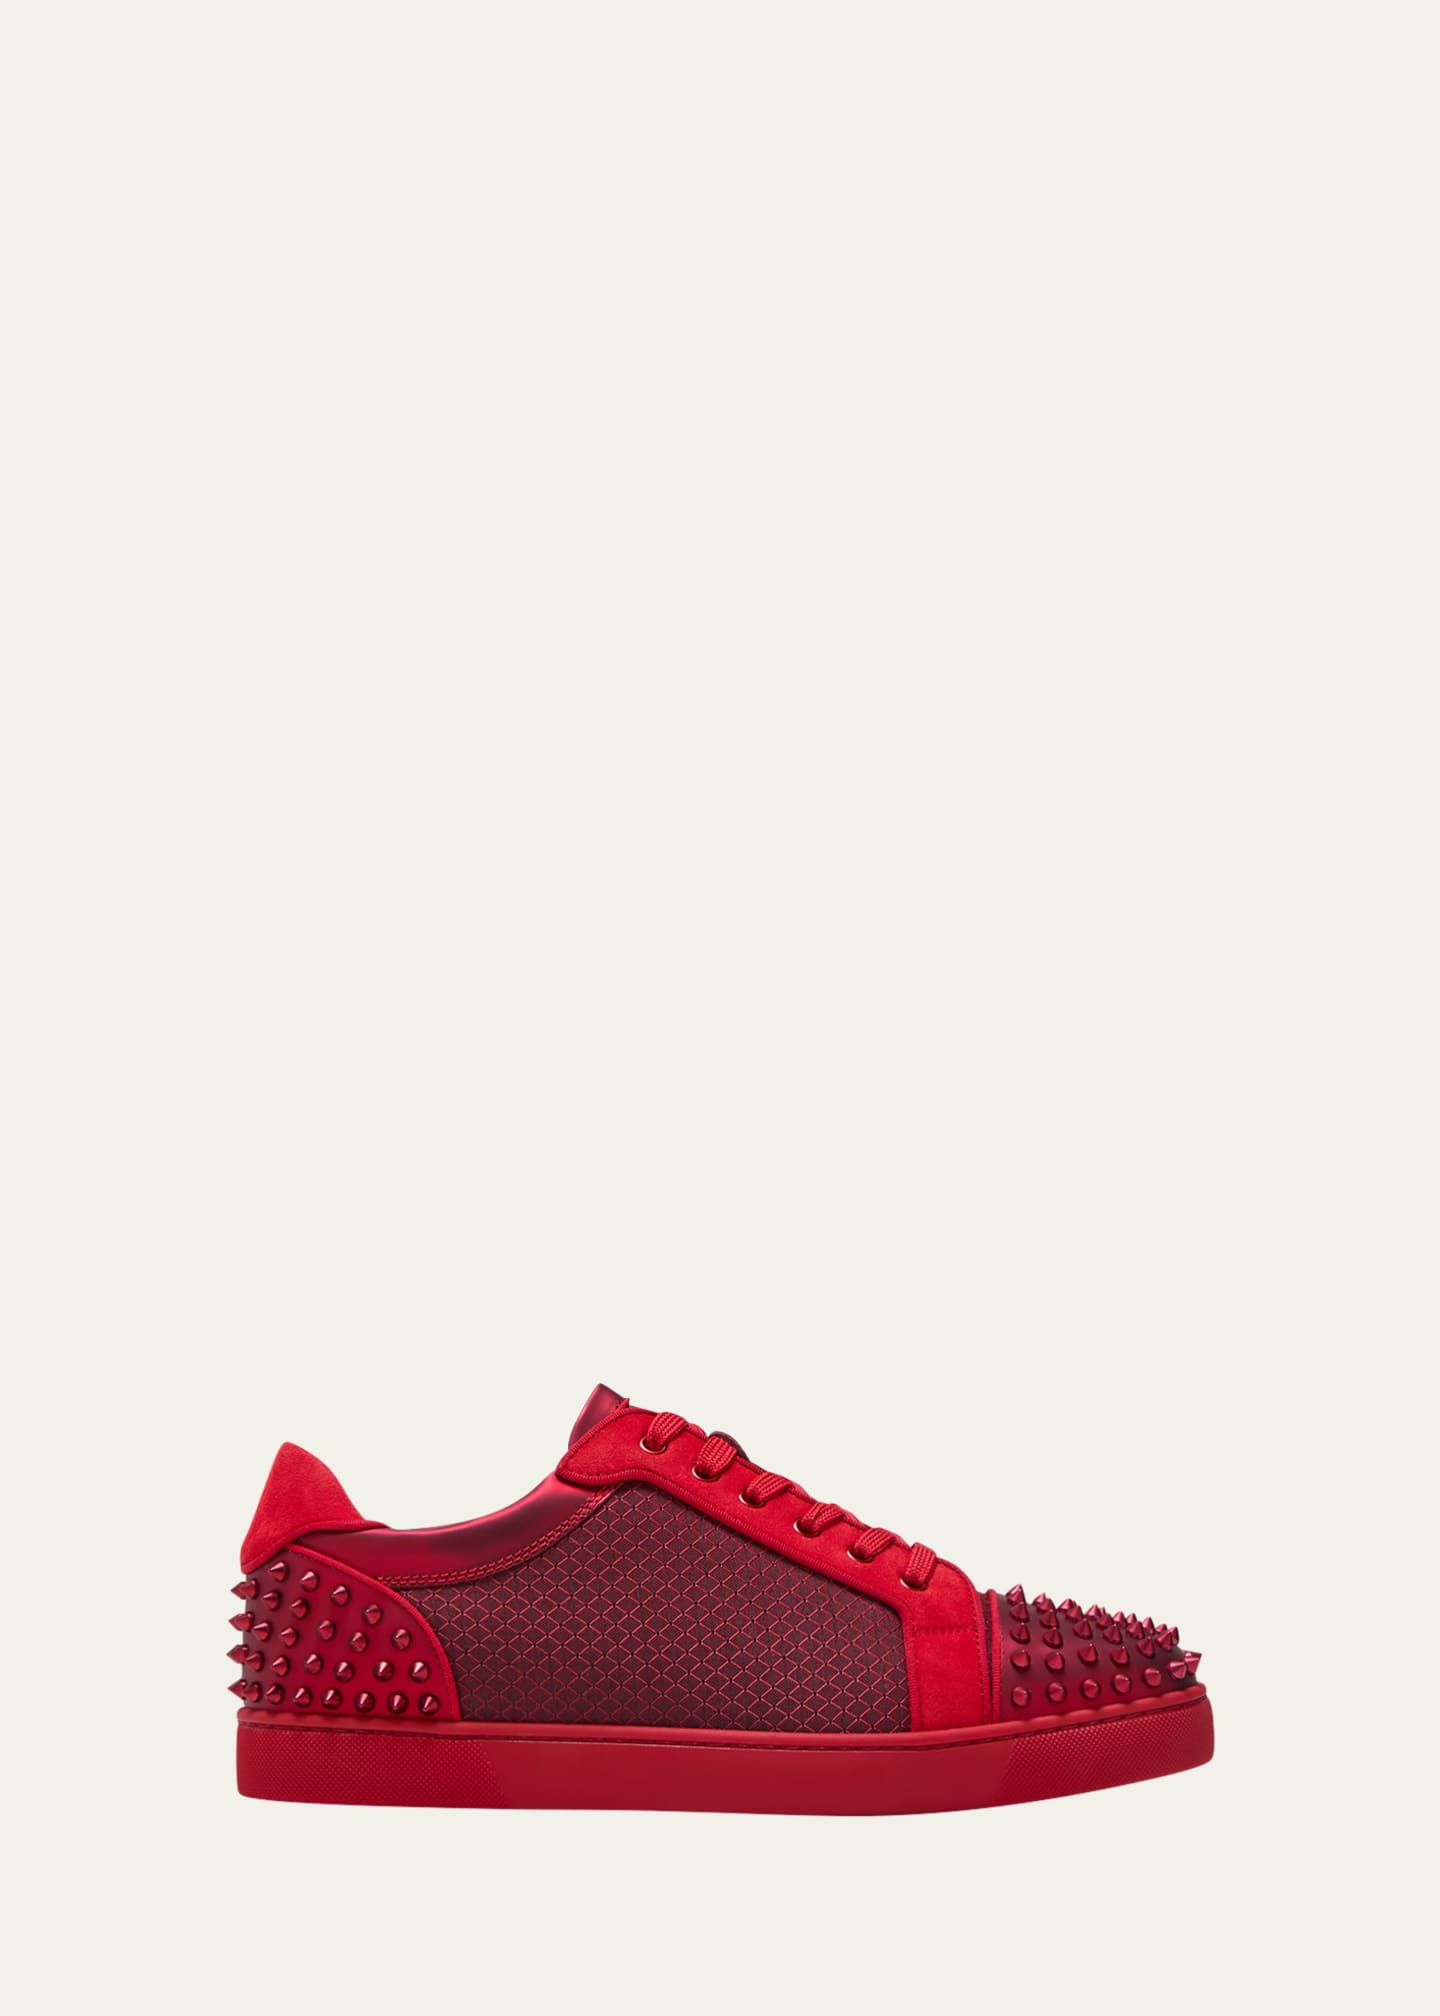 Christian Louboutin Men's Seavaste Spiked Leather Low-Top Sneakers